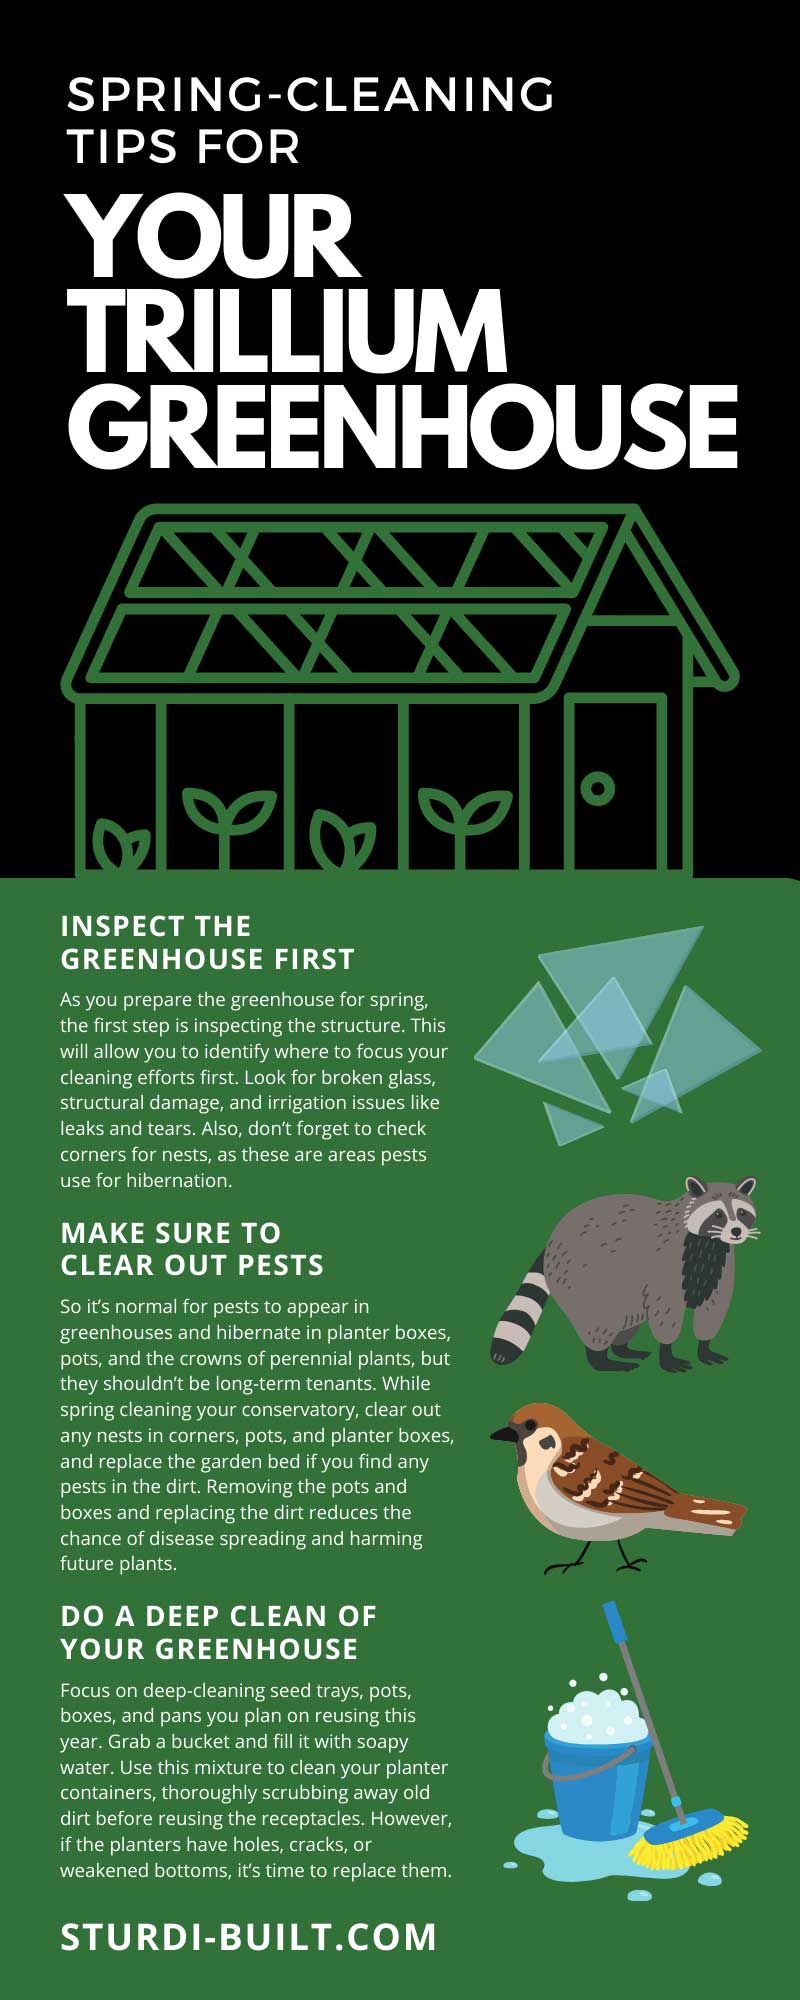 7 Spring-Cleaning Tips for Your Trillium Greenhouse